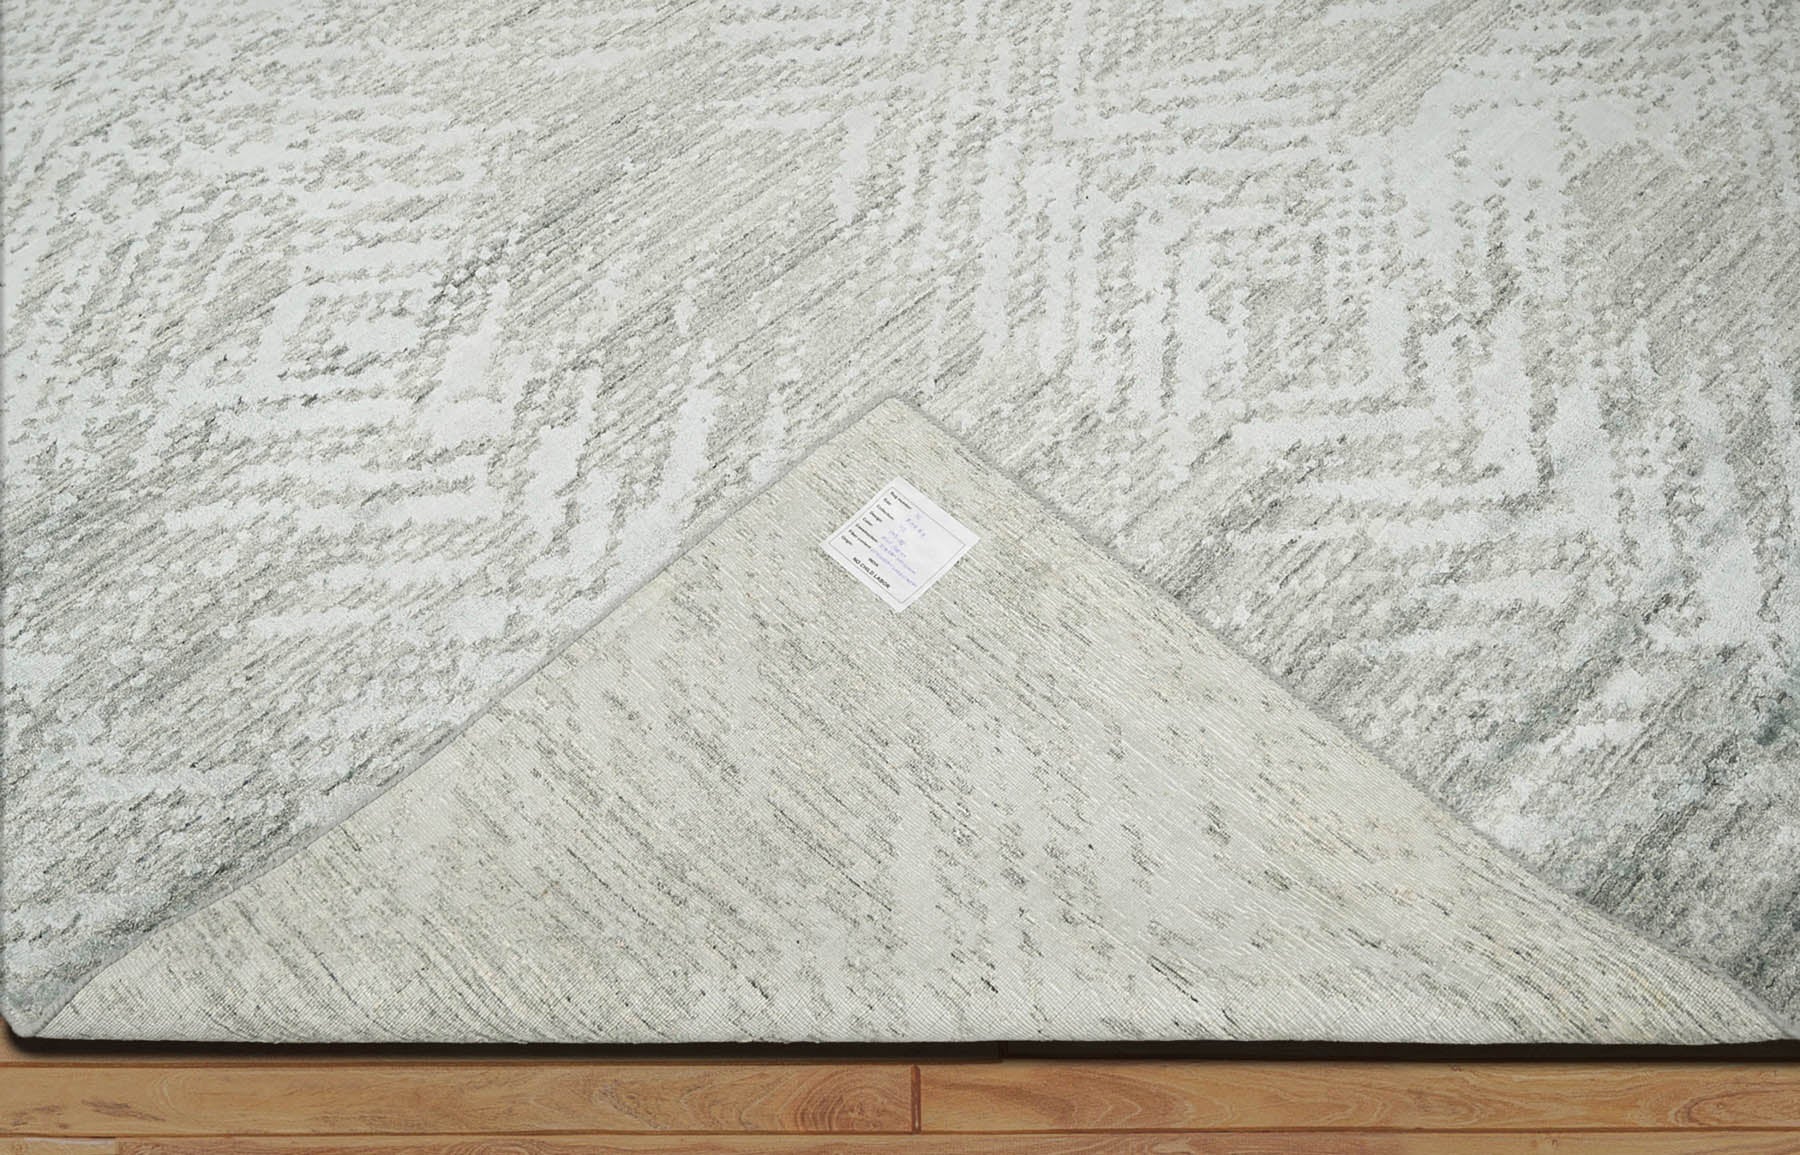 Natalei 9x12 Celadon, Gray Hand Knotted 100% Wool Modern & Contemporary Oriental Area Rug